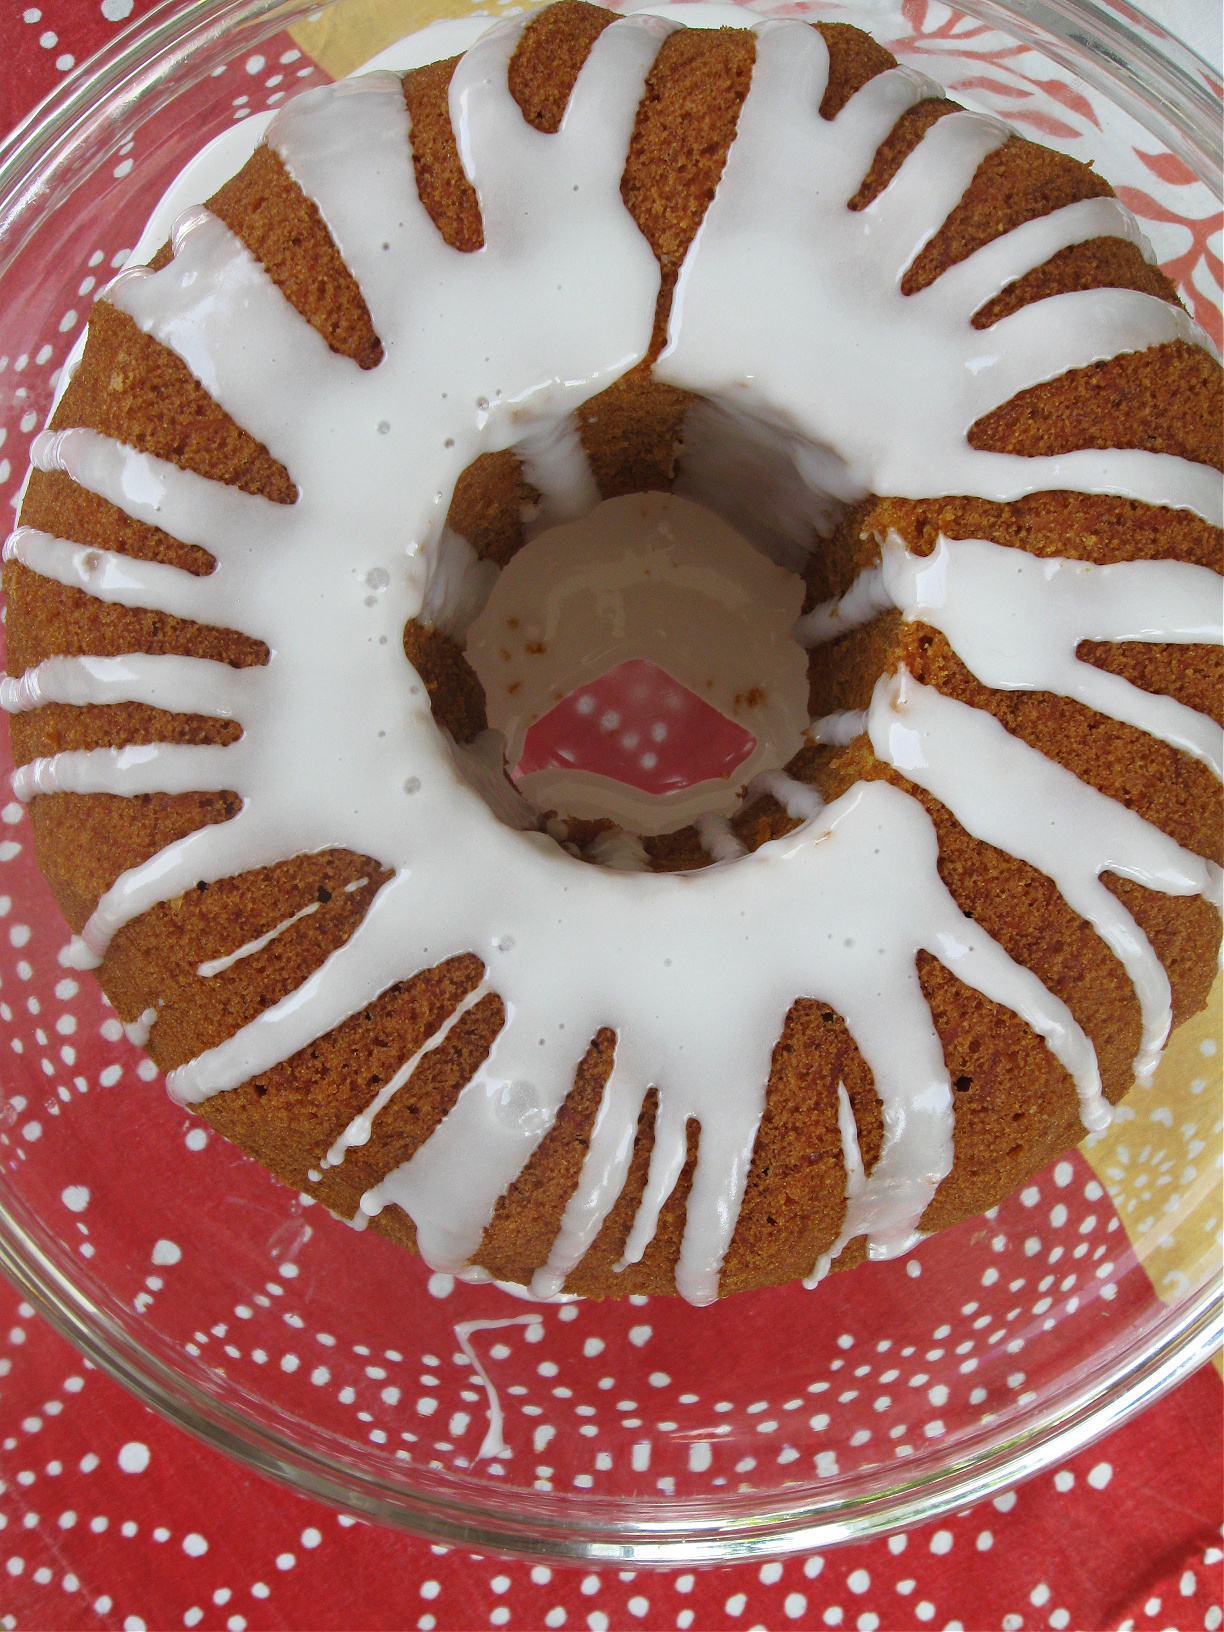 over head view of the glazed carrot cake